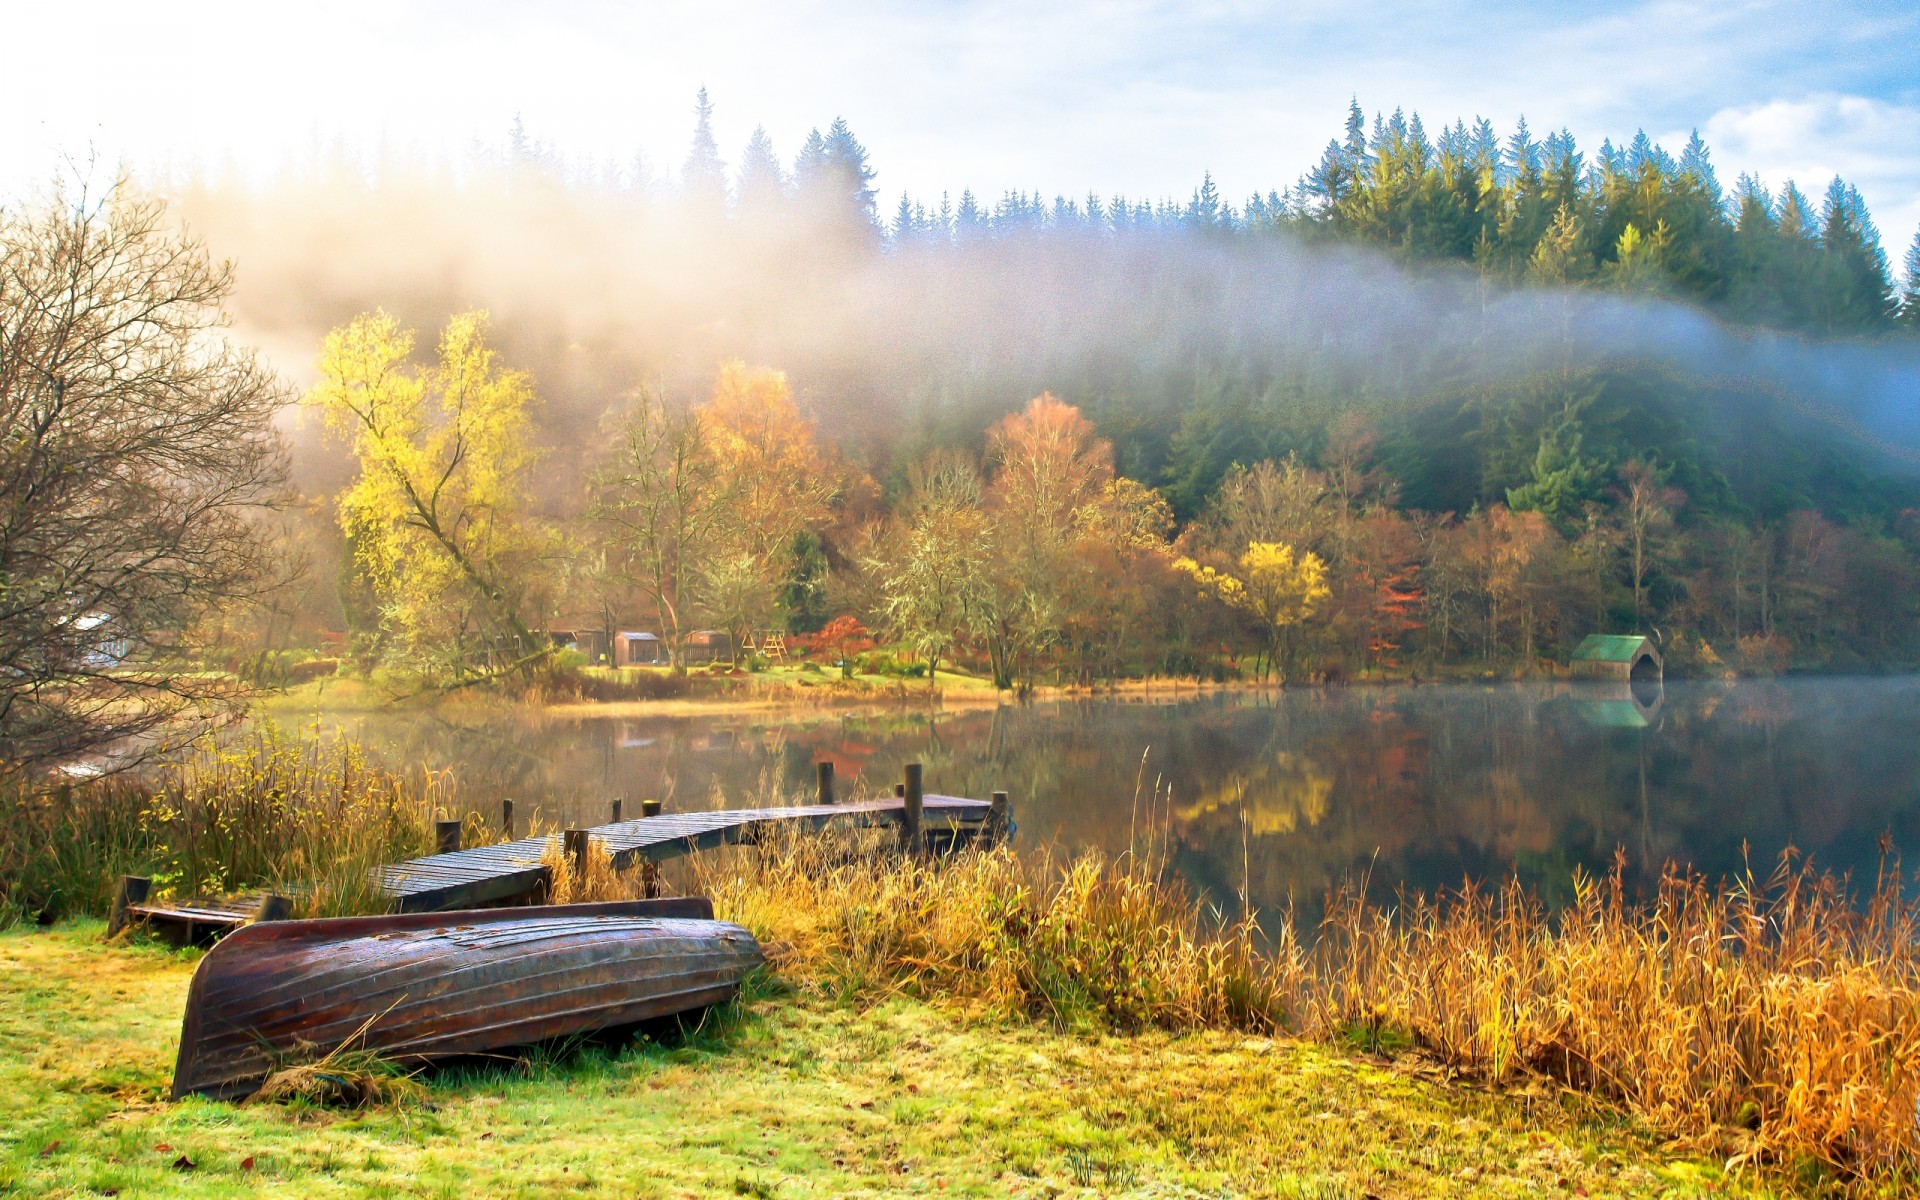 nature, Landscape, Sky, Clouds, Lake, Water, Boats, Trees, Autumn, Fog, Reflection, Fall Wallpaper